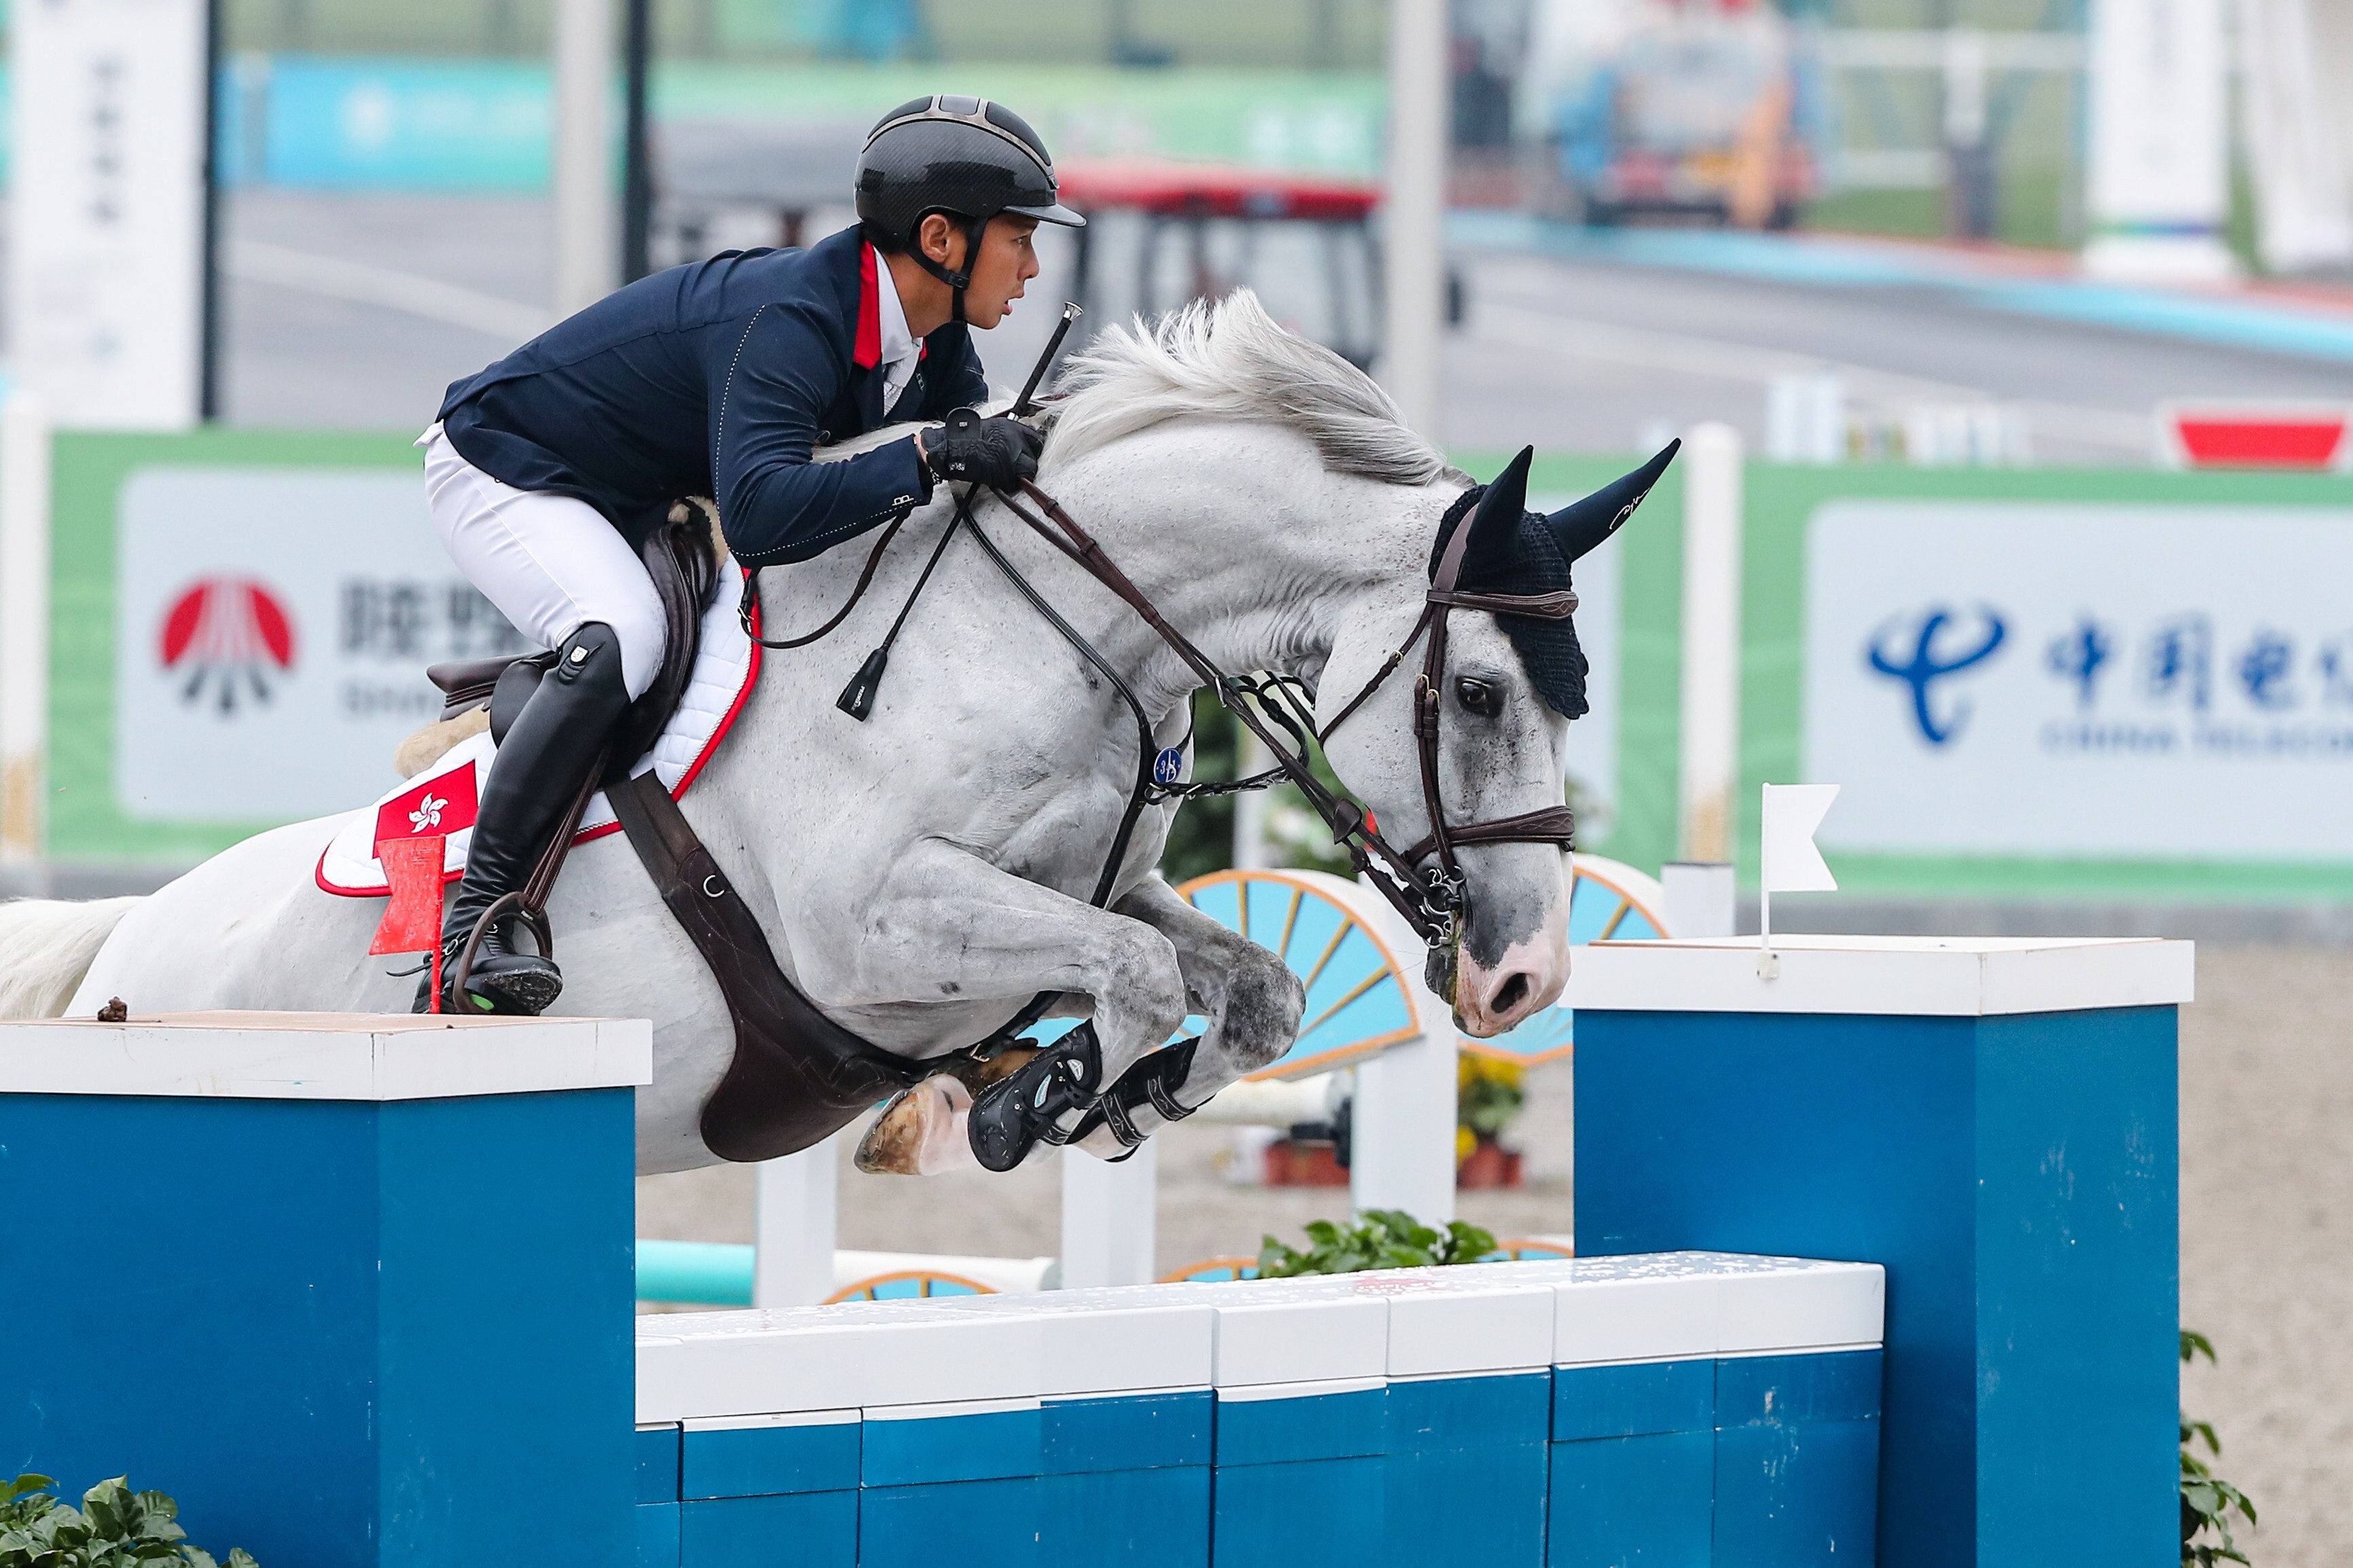 Hong Kong’s Kenneth Cheng and his horse Funchal in the showjumping qualifiers at the National Games in Xian. Photo: LCSD/Sports Road)